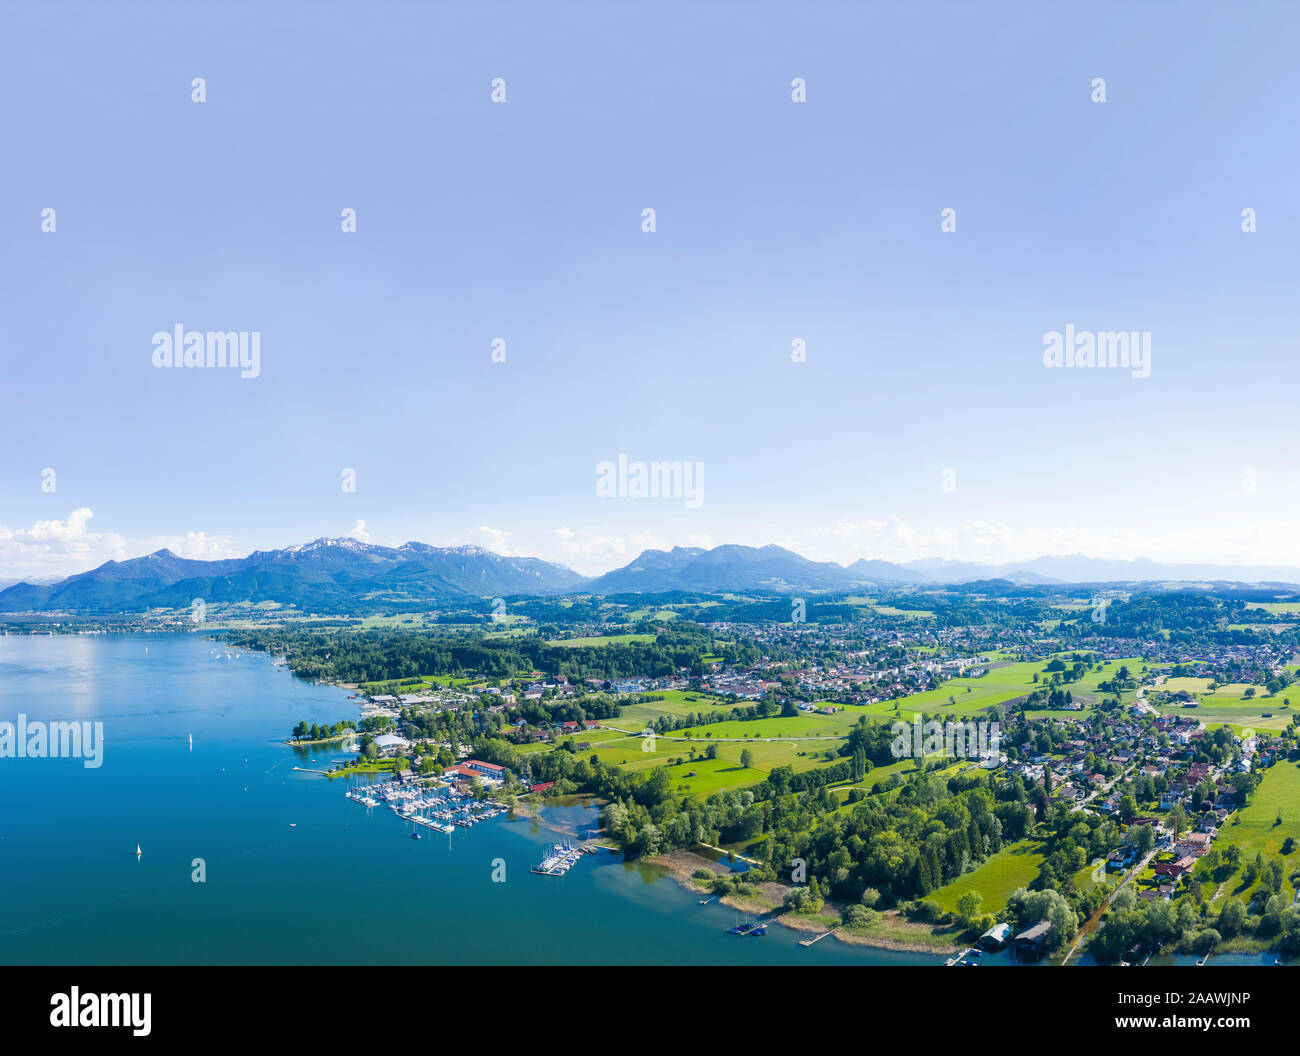 Germany, Bavaria, Prien am Chiemsee, Sky over coastal town with Chiemgau Alps in background Stock Photo